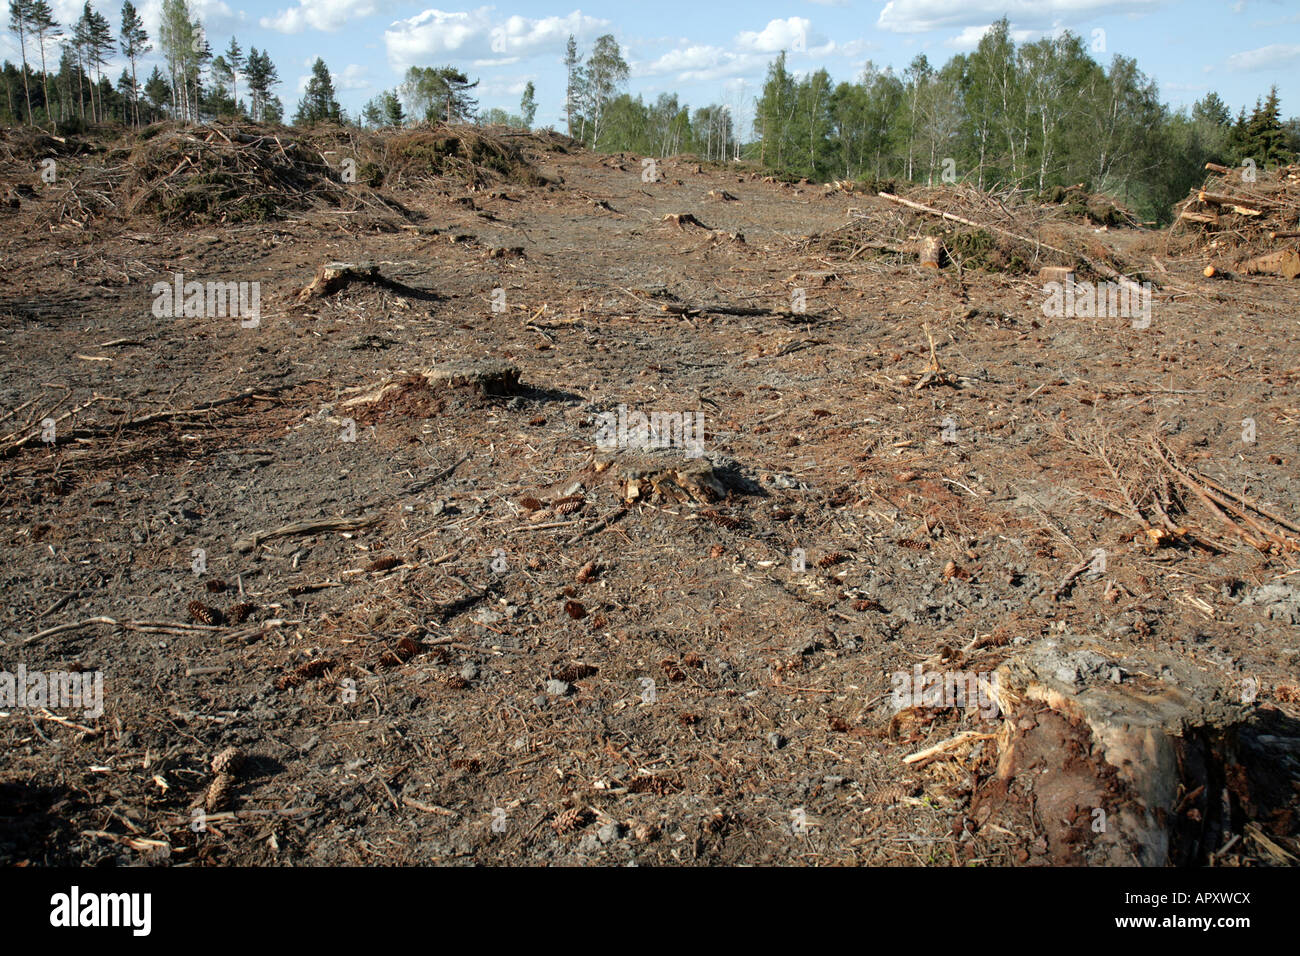 Stumps in a clear-cut pine tree forest in sweden. Stock Photo